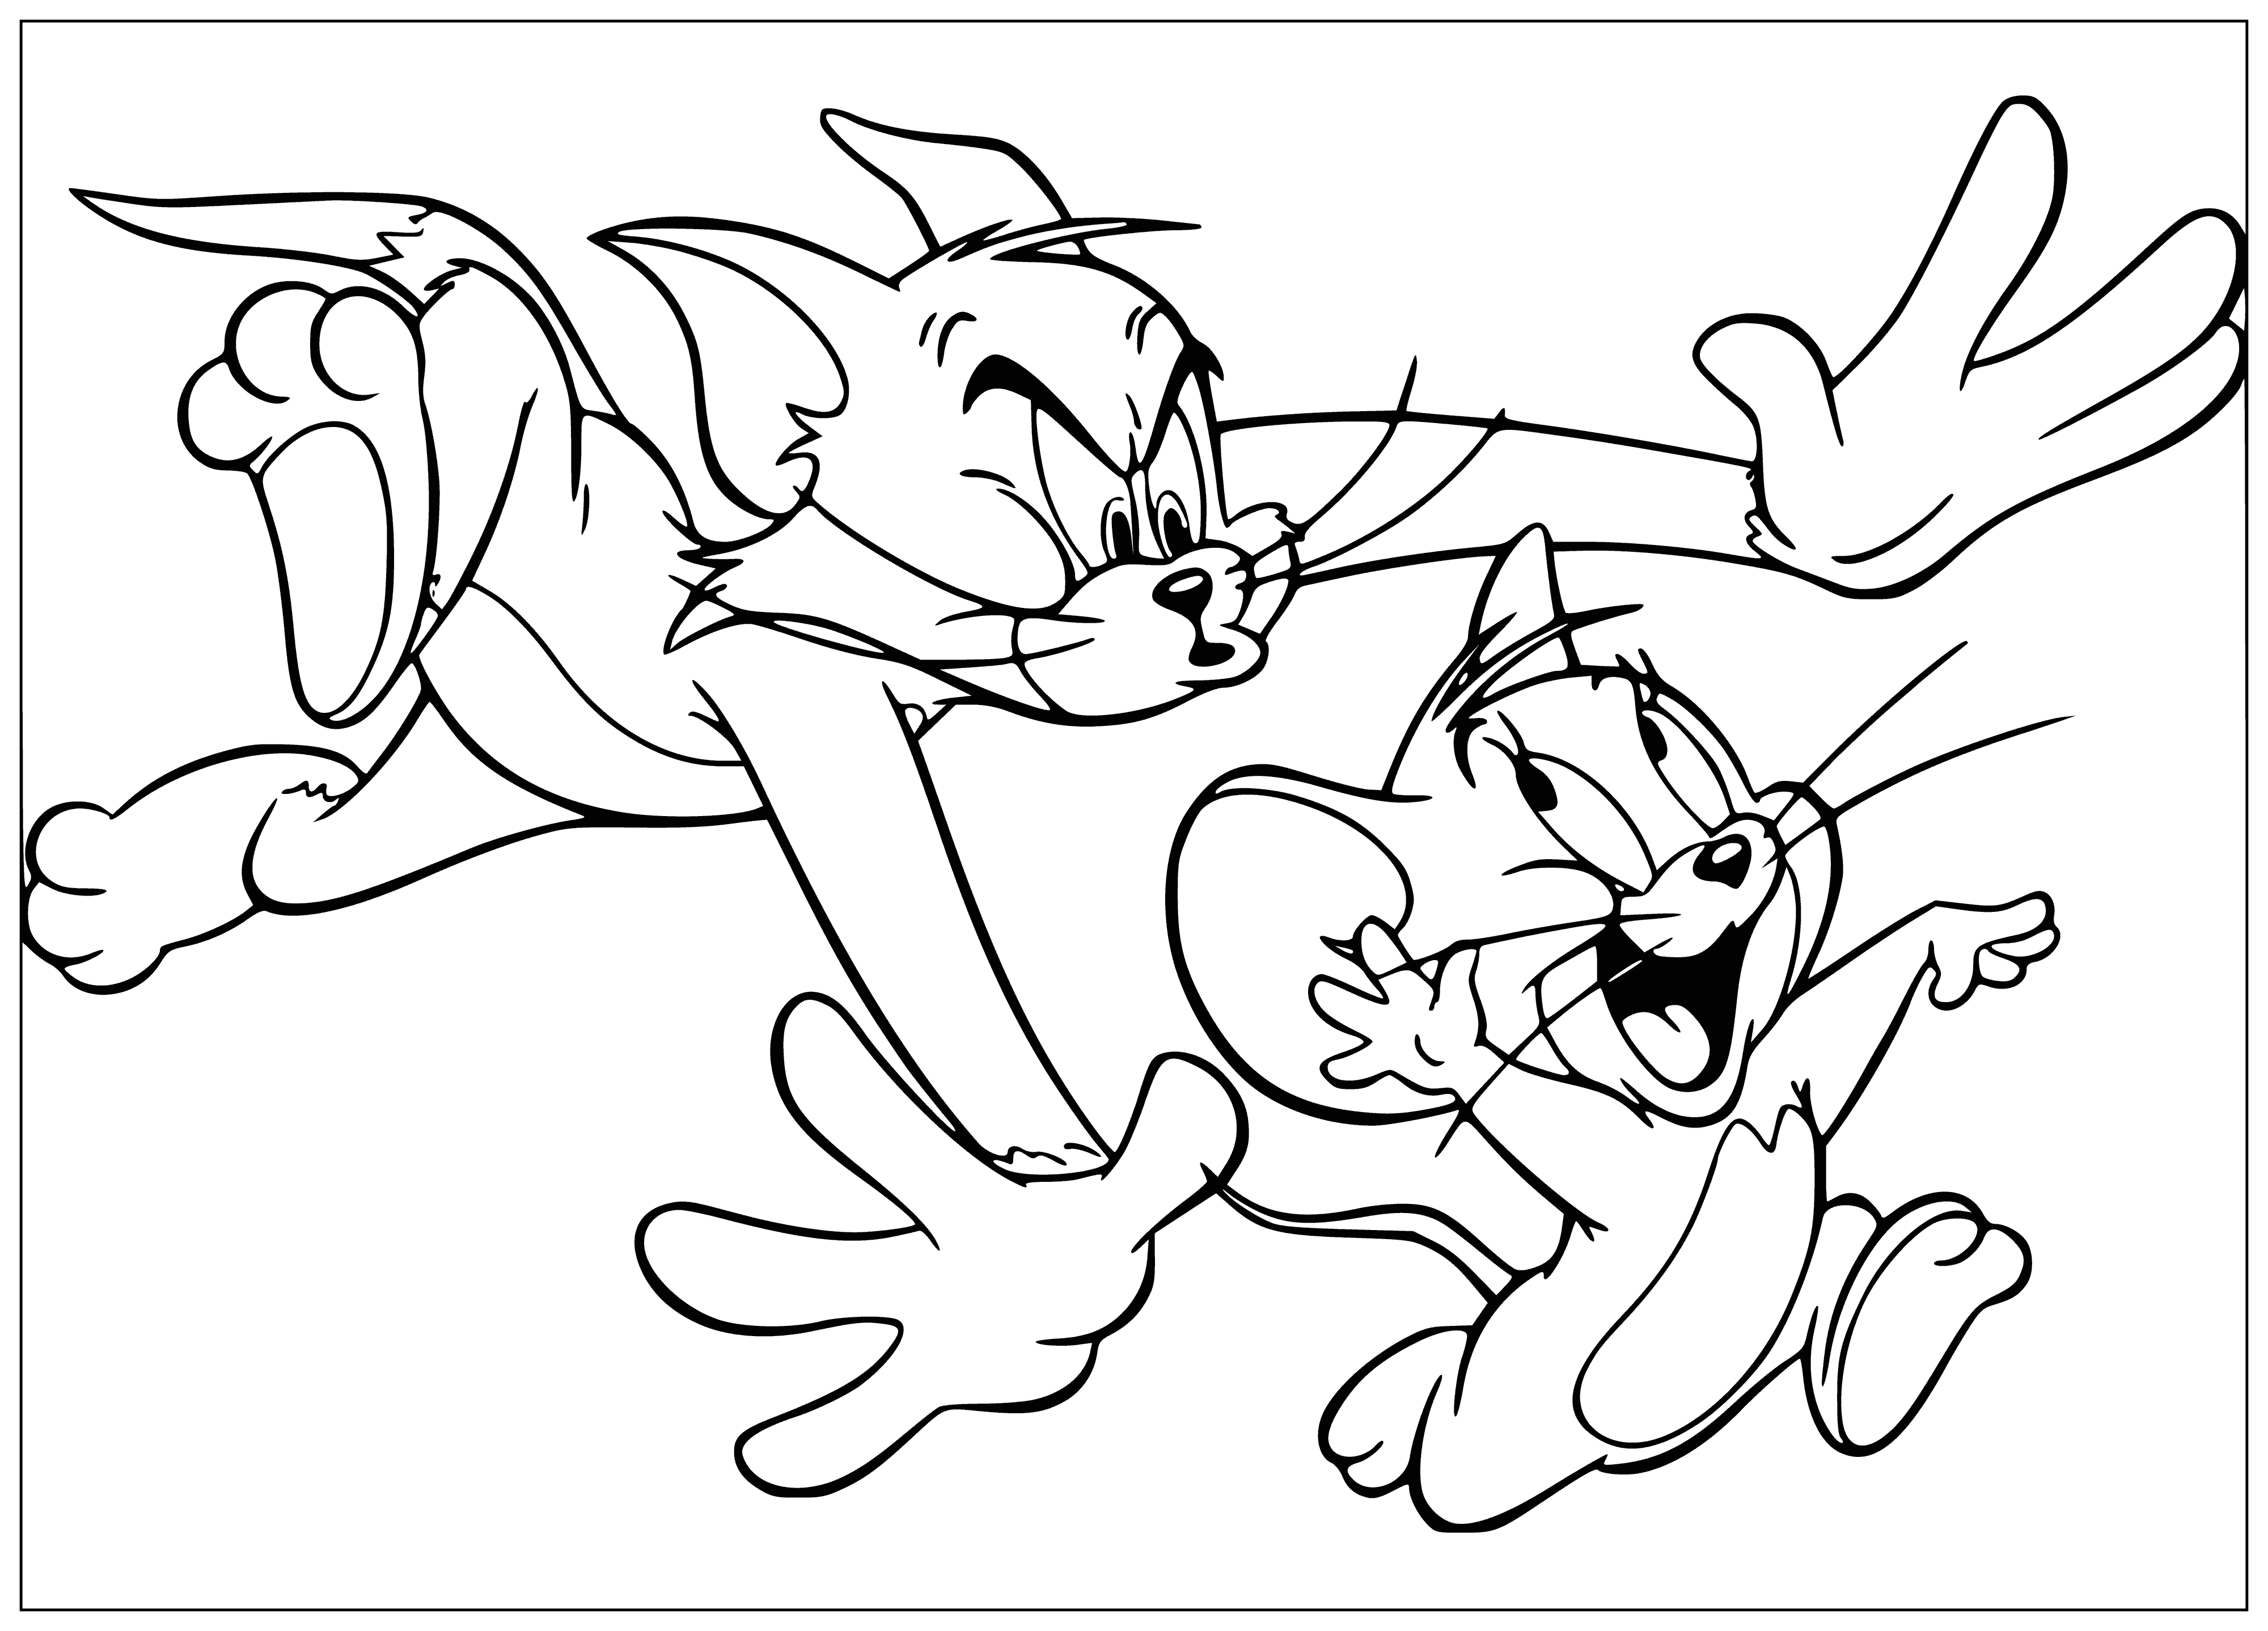 coloring page: Tom and Jerry are in a frenzied chase, with Jerry managing to stay one step ahead of Tom.